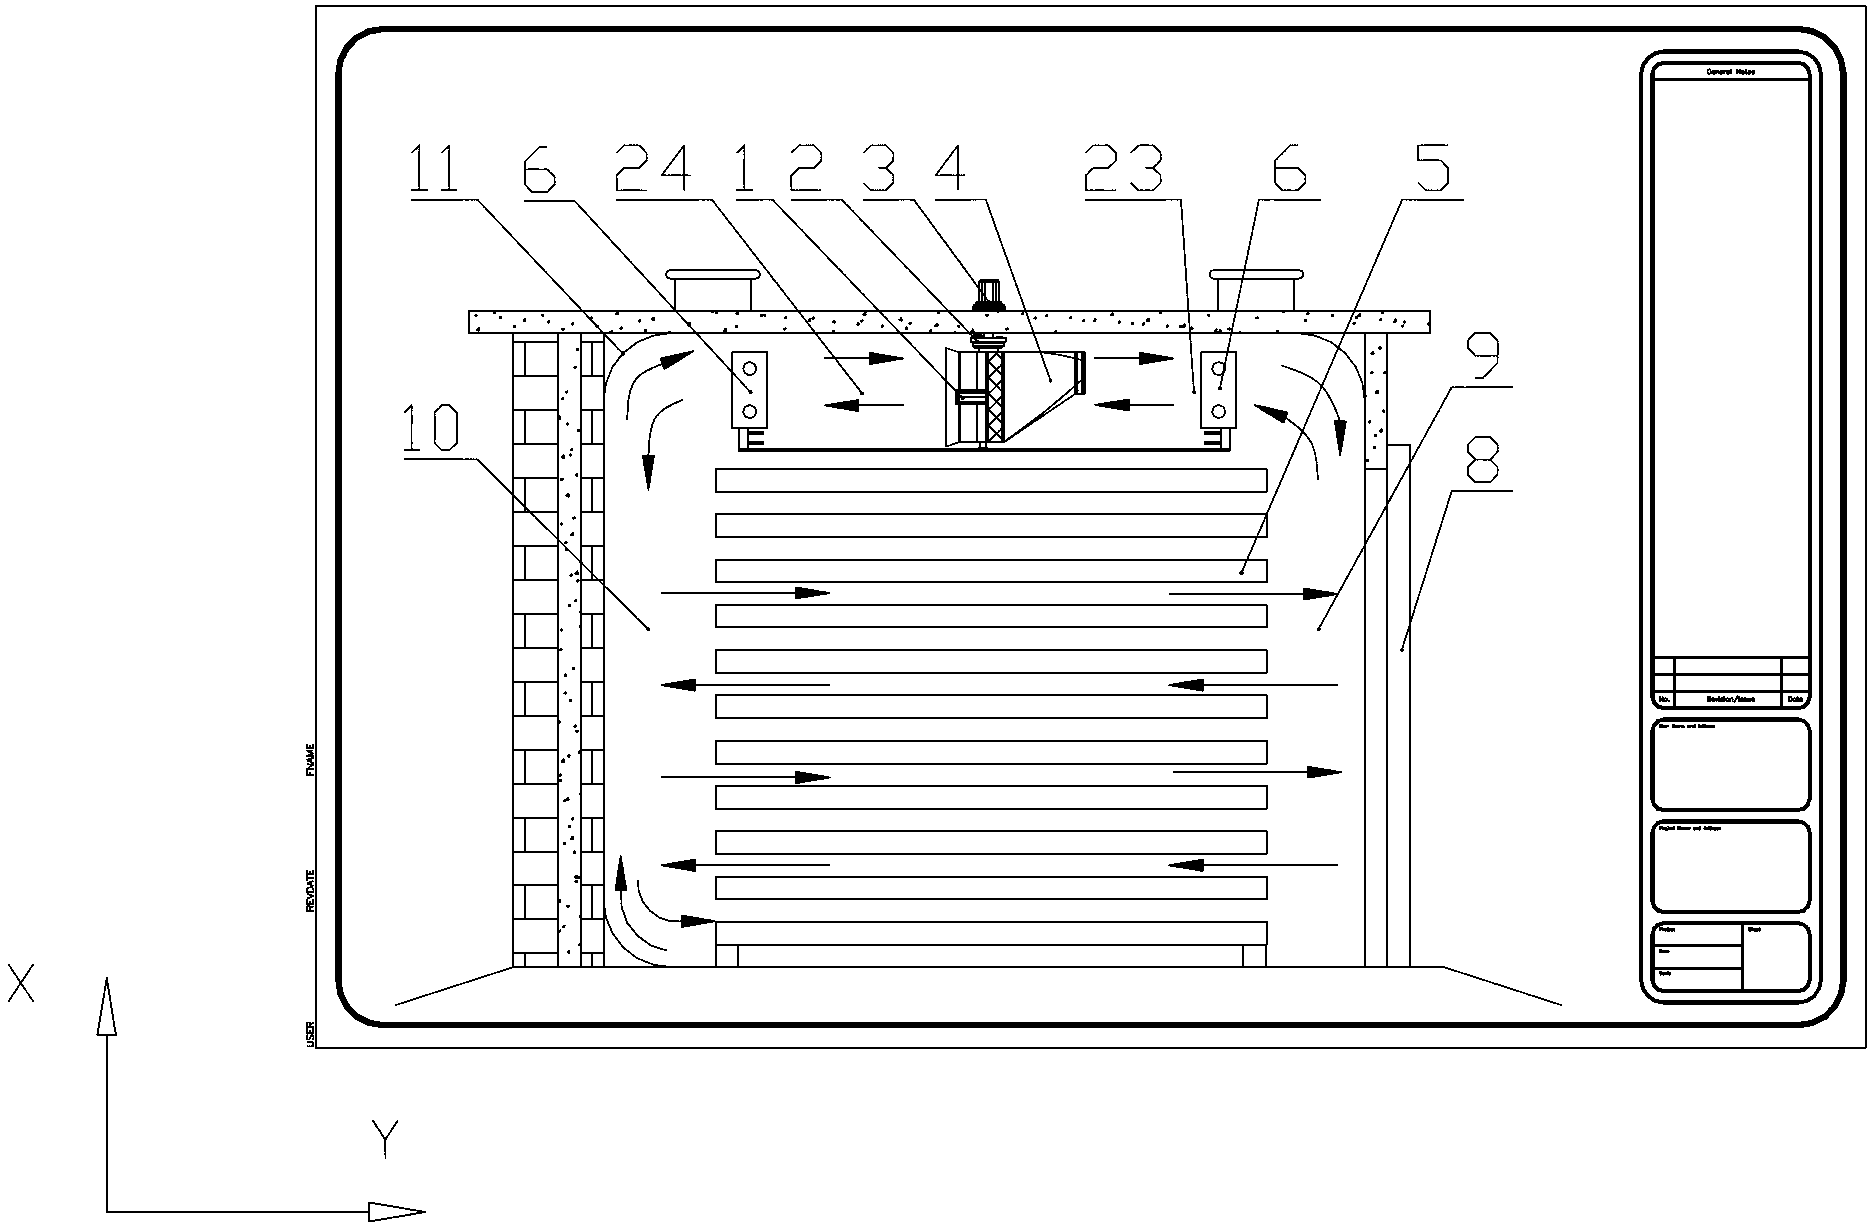 Heating and blowing device for large hot air drying room